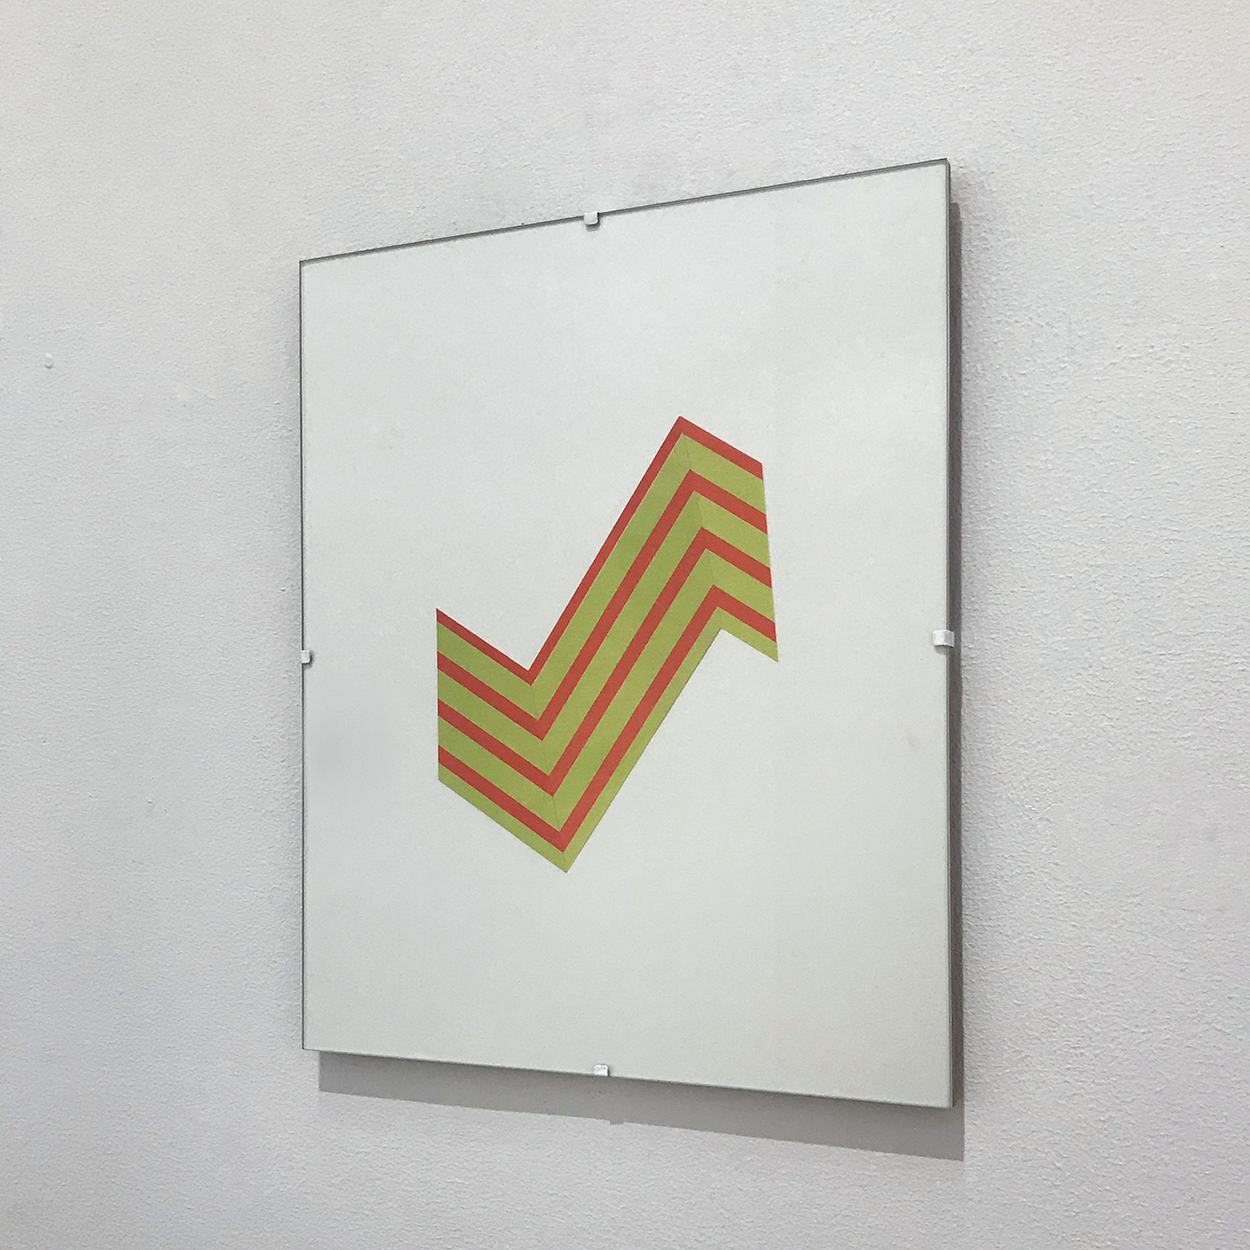 Untitled, Figured paper, glass frame, 300 x 240 × 10 mm, 2018